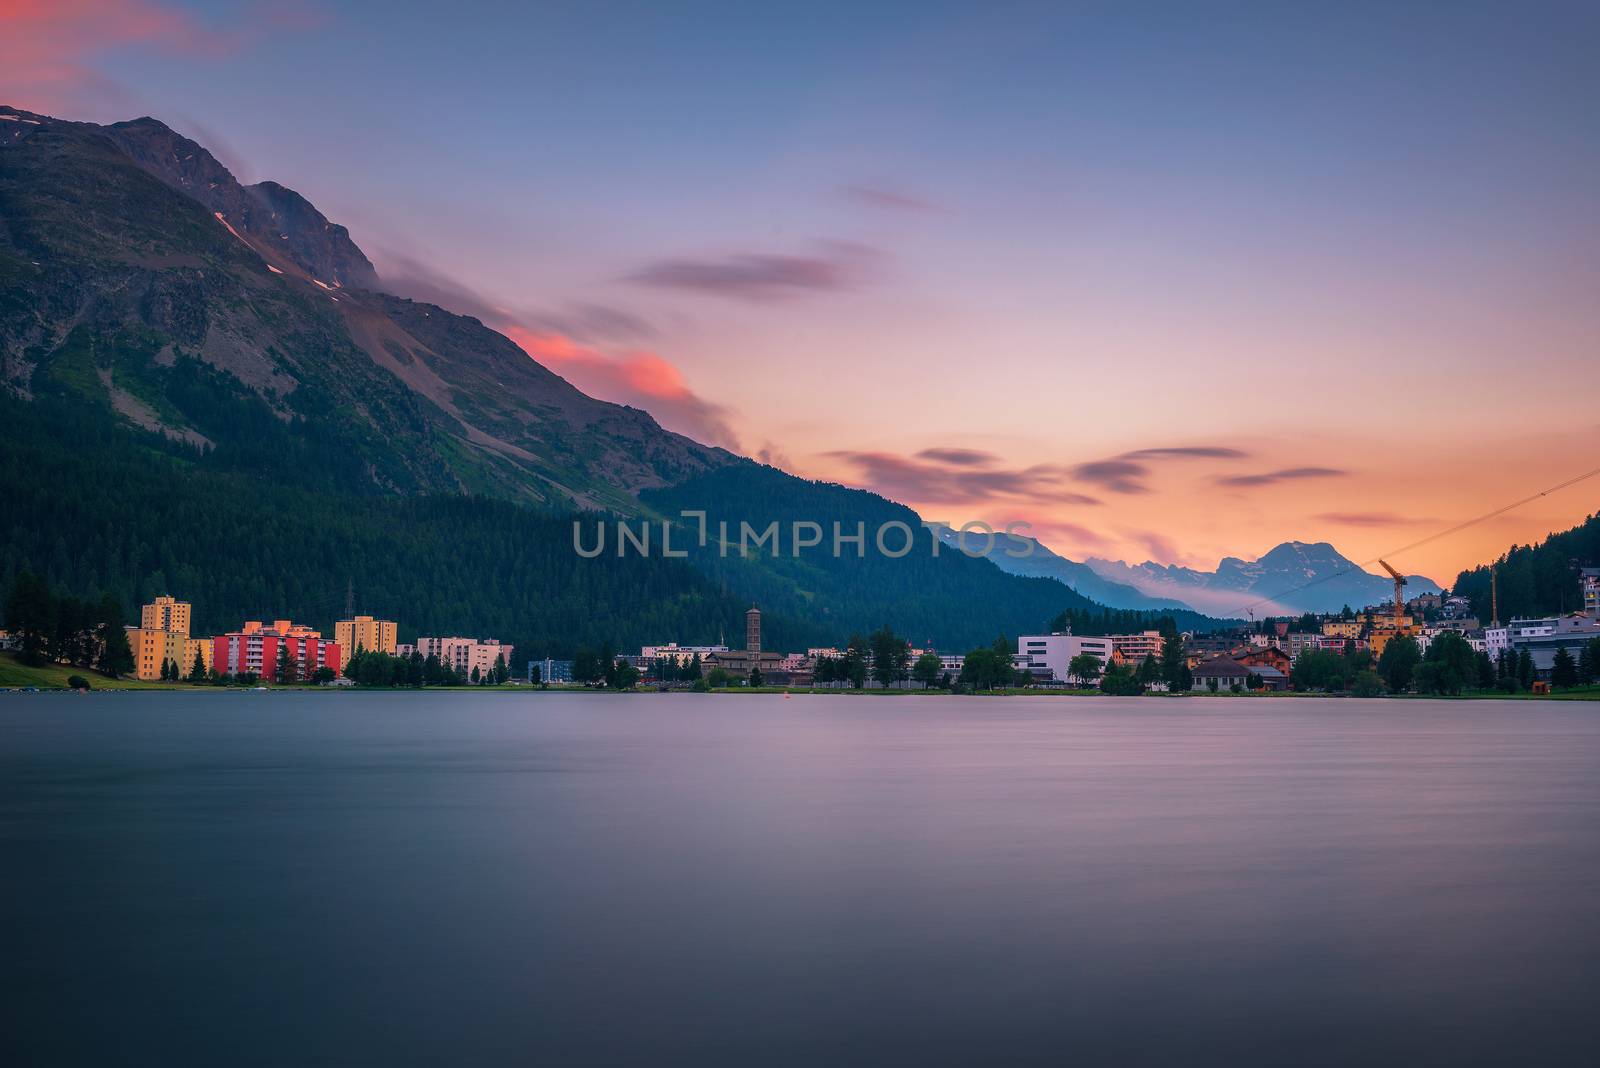 Sunset above St. Moritz with lake and Swiss Alps in Switzerland by nickfox